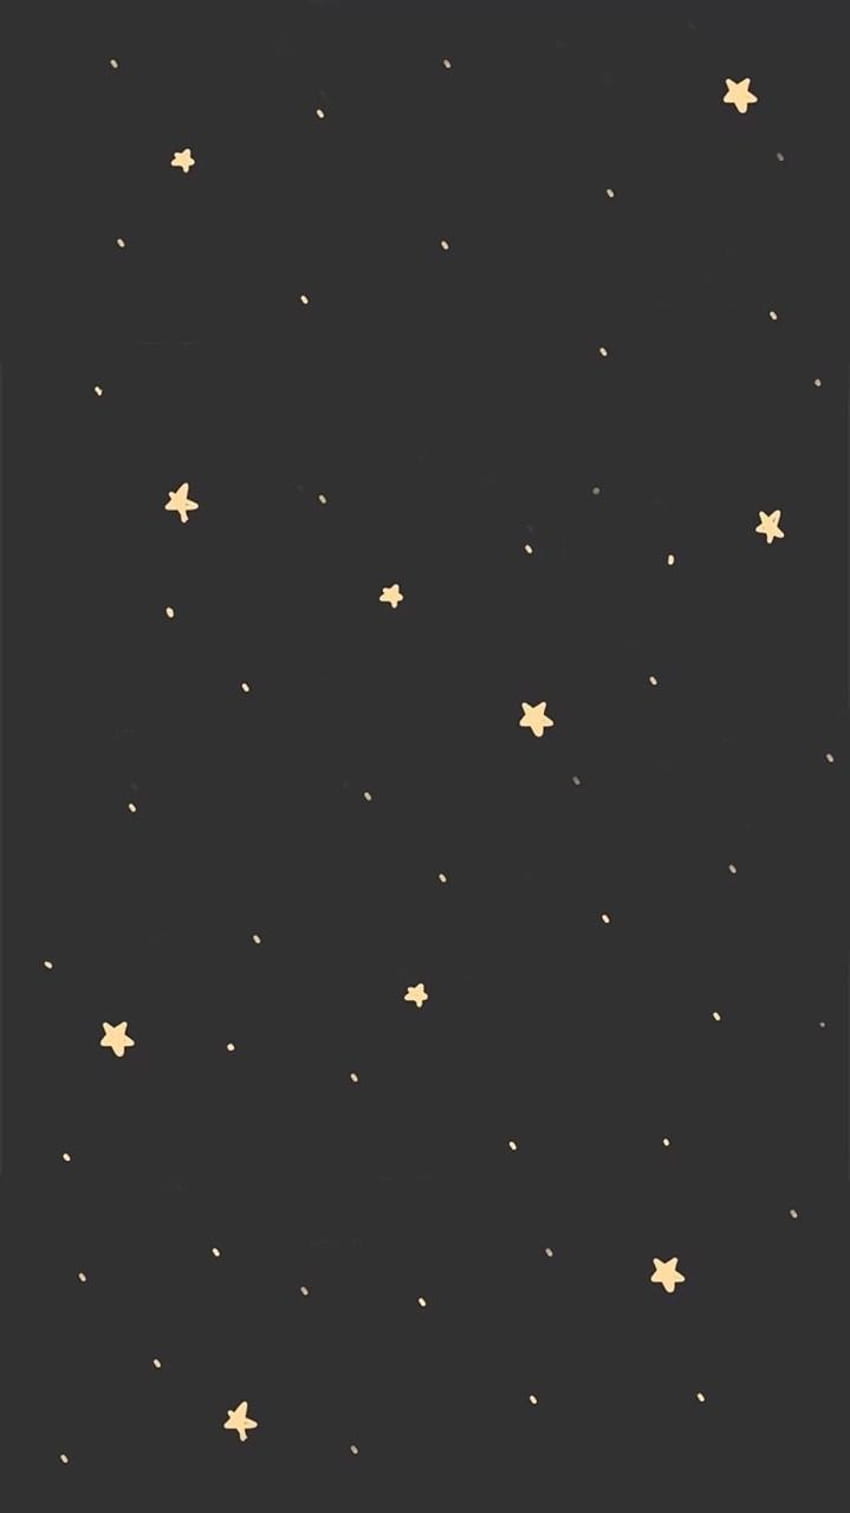 A black background with gold stars - Stars